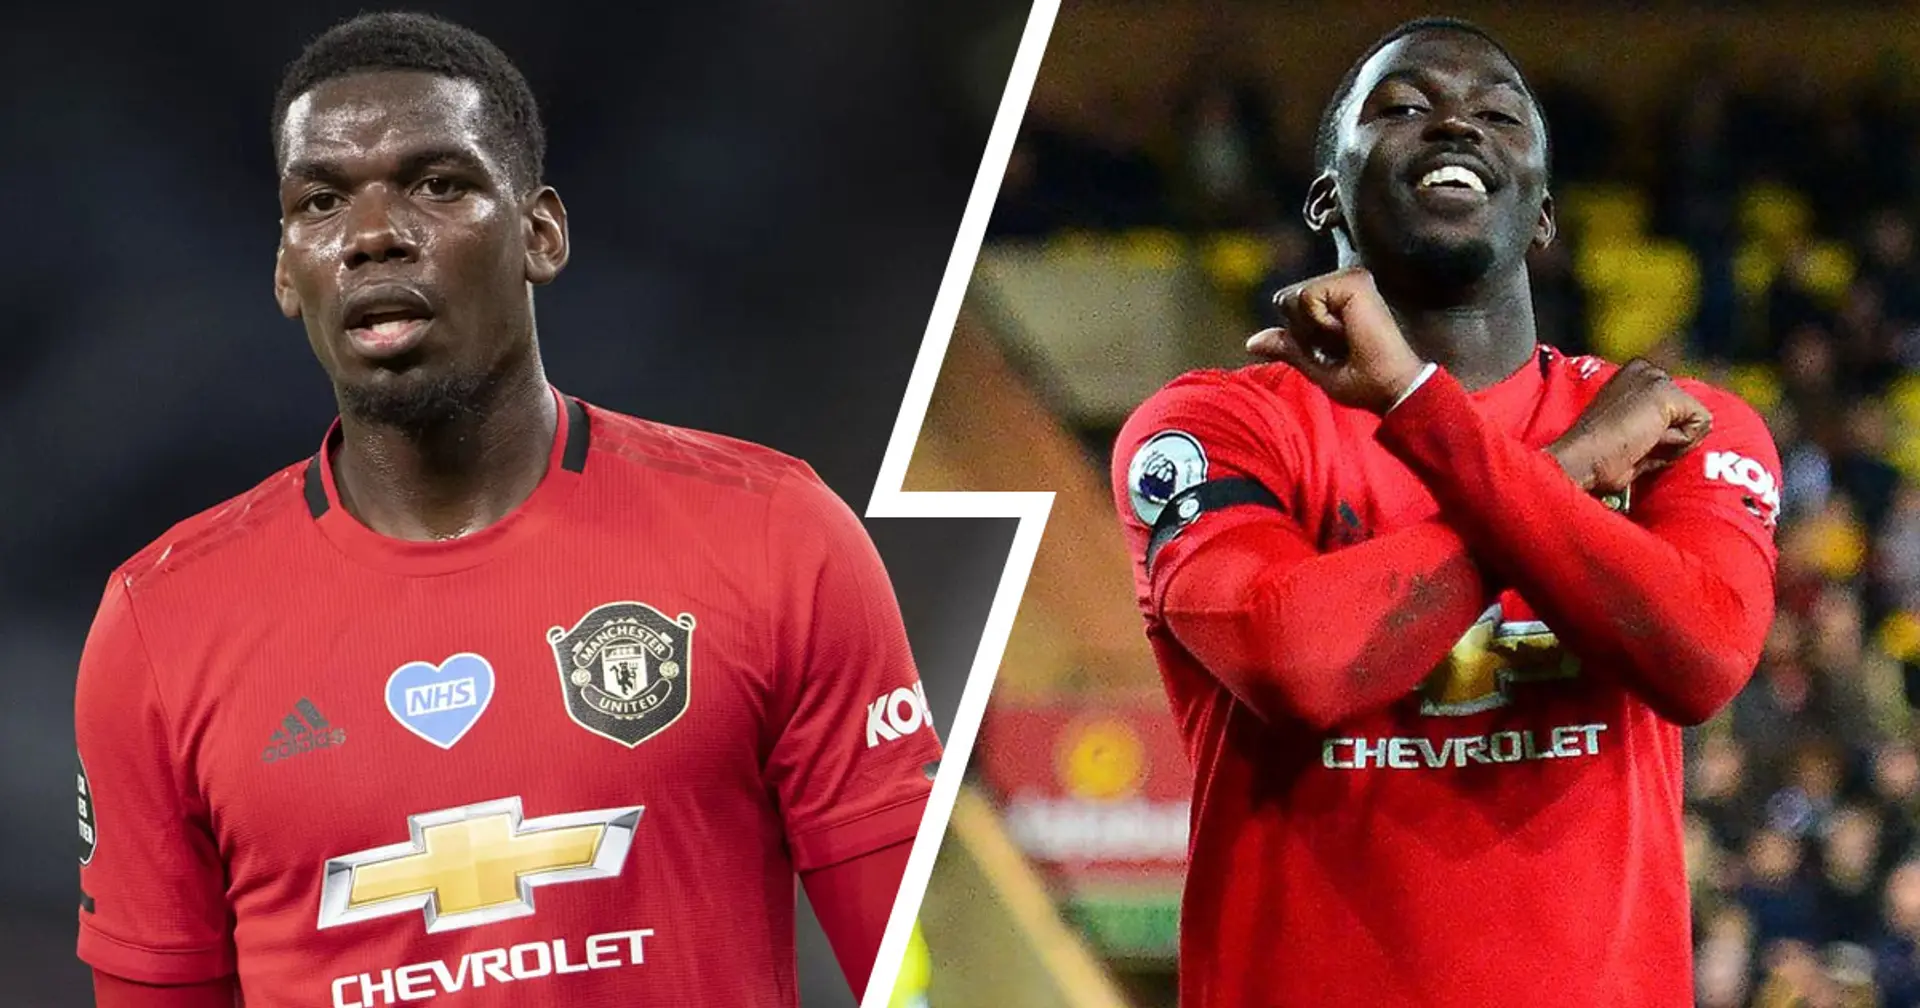 ‘He takes care of us’: United youngster Aliou Traore reveals how Pogba has been helping youth academy stars improve